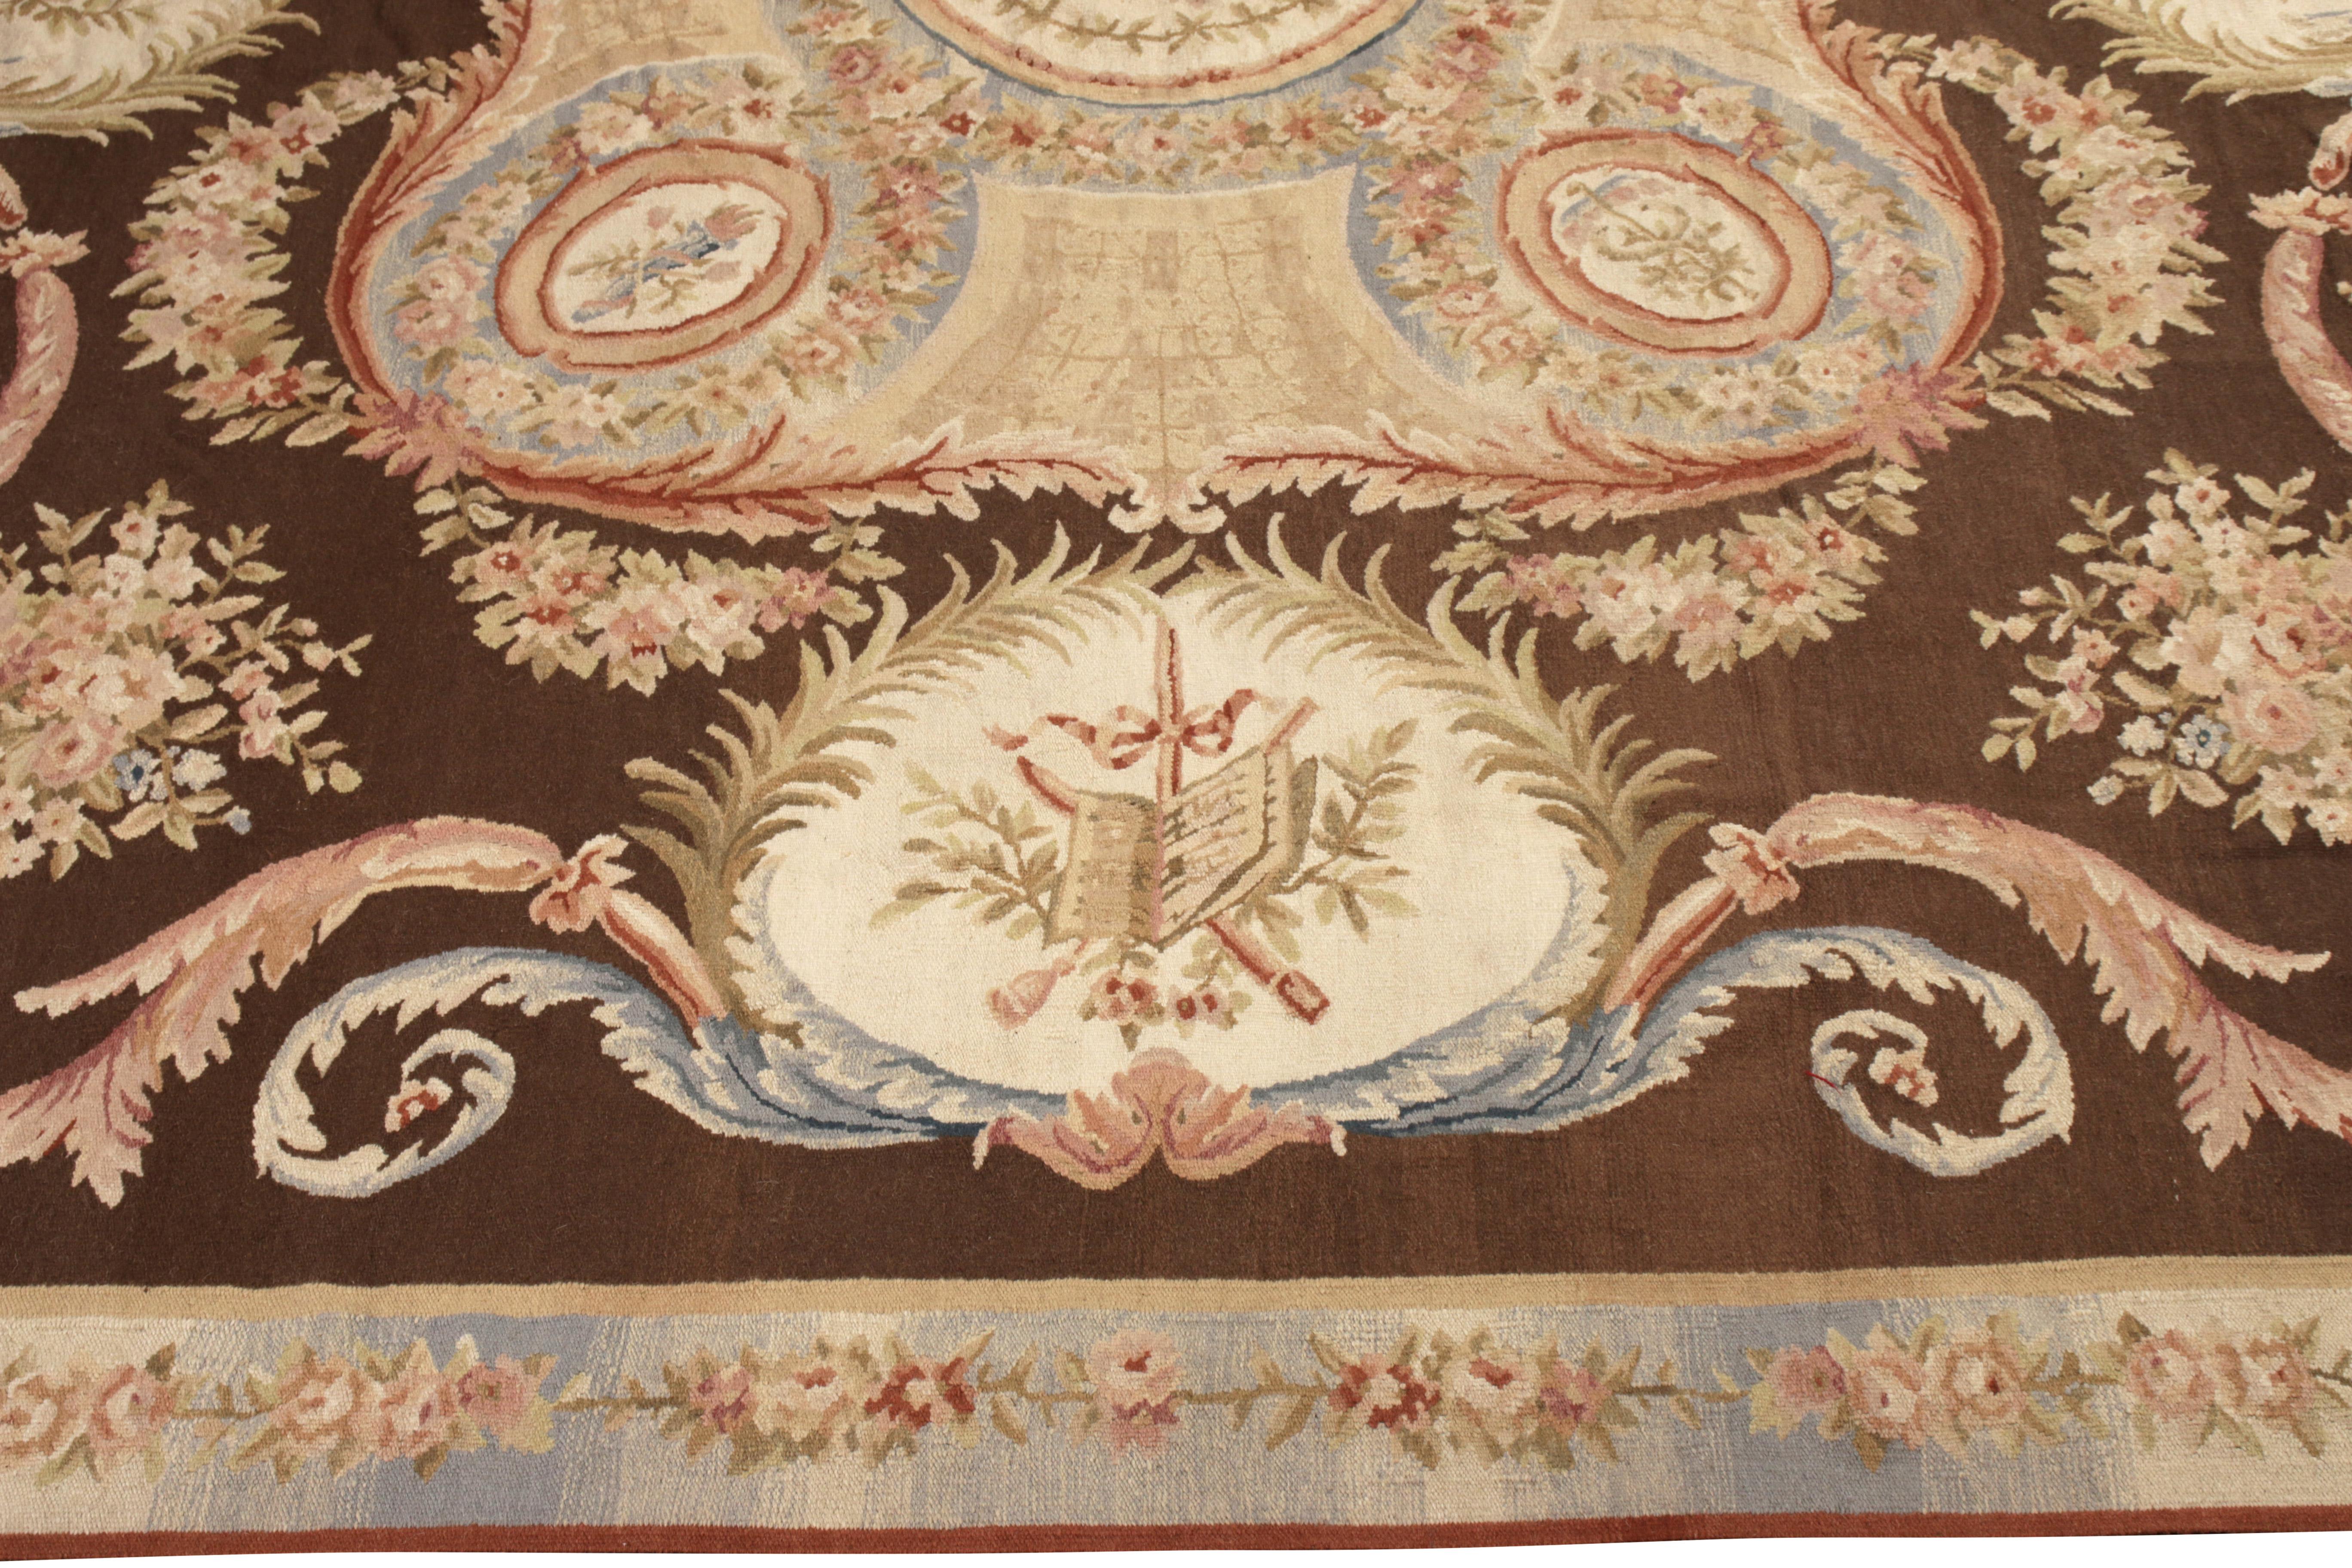 Rug & Kilim's 18th Century Aubusson Style Kilim Beige Brown Medallion Style Rug In Good Condition For Sale In Long Island City, NY